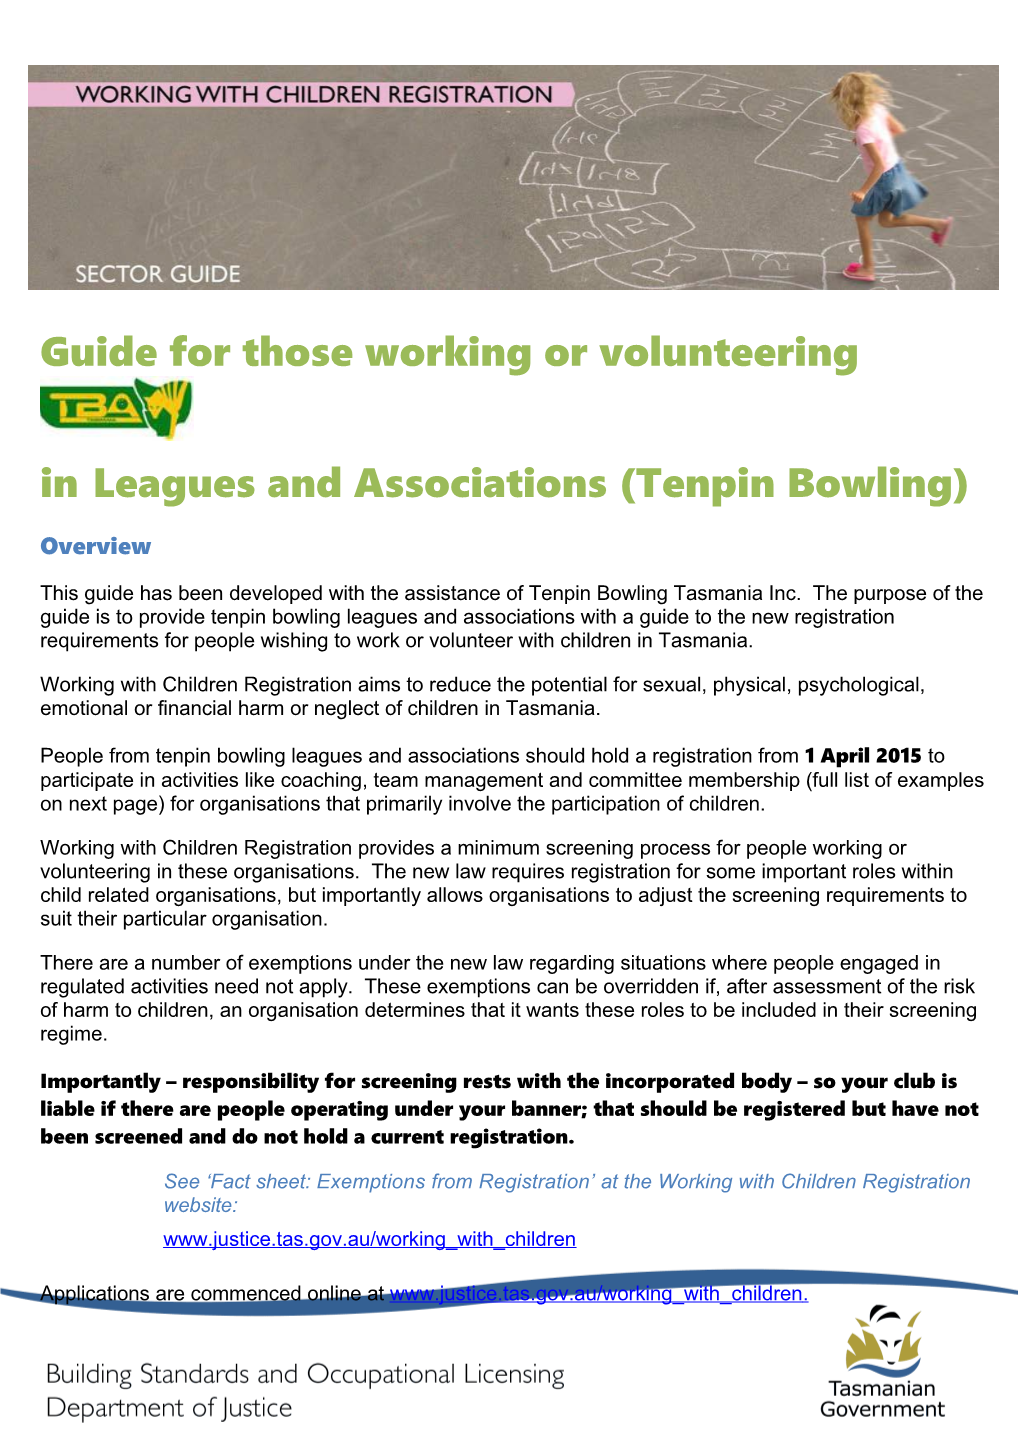 Guide for Those Working Or Volunteering in Clubs and Associations